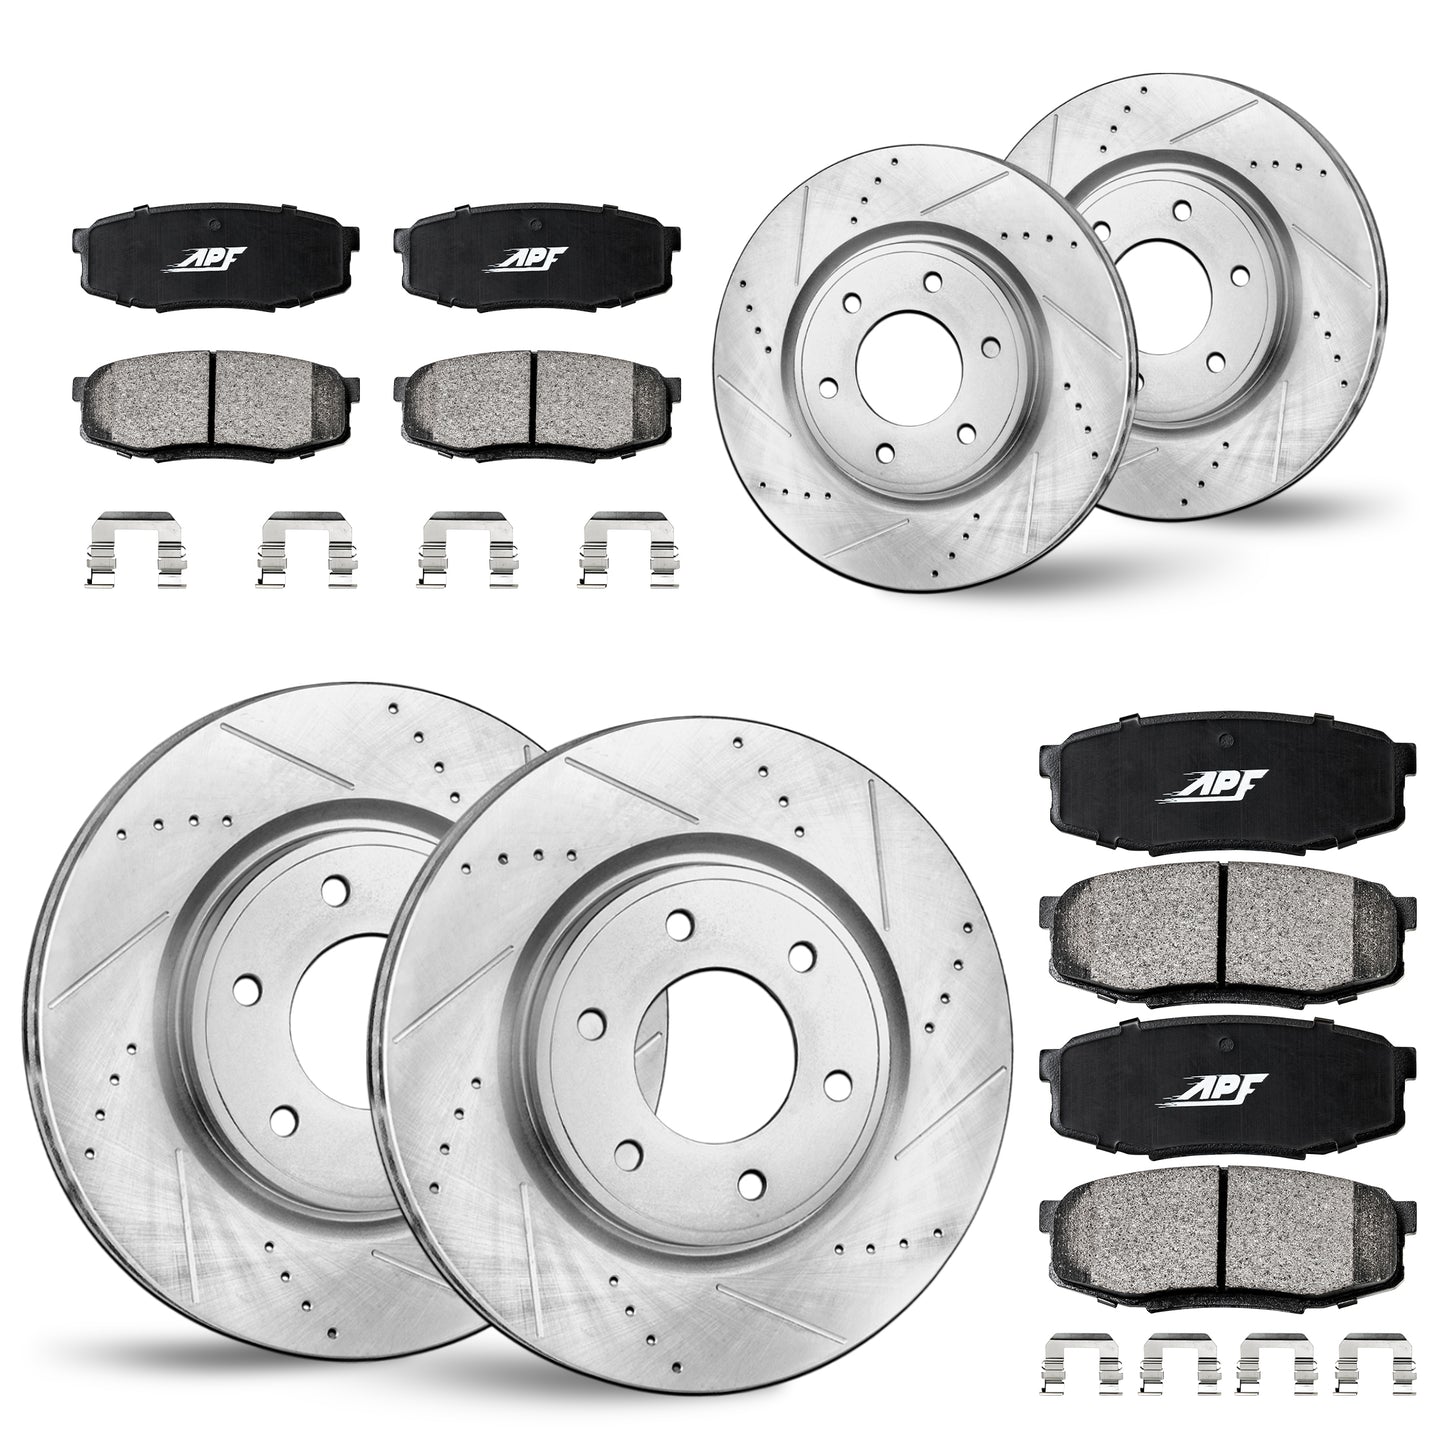 APF Full Kit compatible with GMC Yukon XL 1500 2000-2002 | Zinc Drilled Slotted Rotors with Ceramic Carbon Fiber Brake Pads